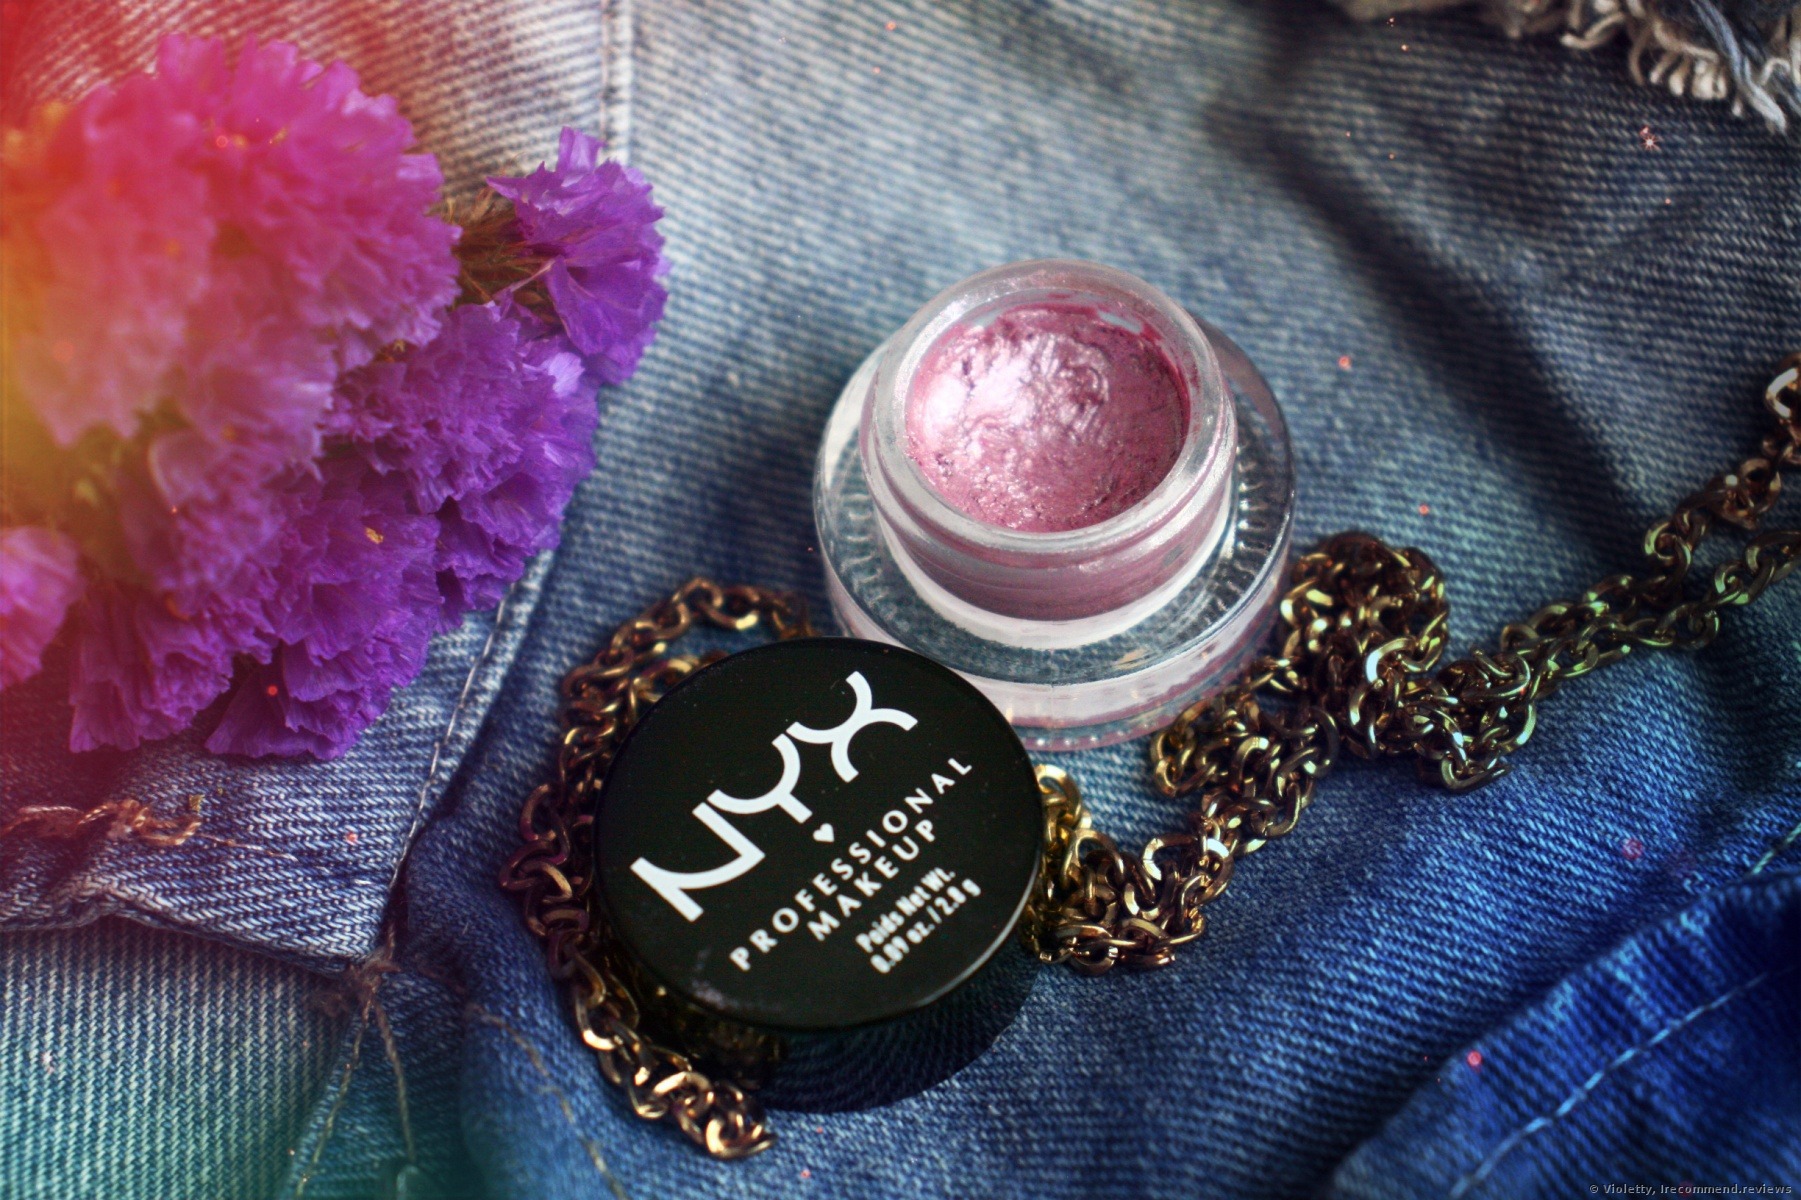 kun Minefelt folkeafstemning NYX Holographic Halo Cream Eyeliner - «Holographic makeup -  extraterrestrial splendor or boring mediocrity? Shade Cotton Candy 03» |  Consumer reviews